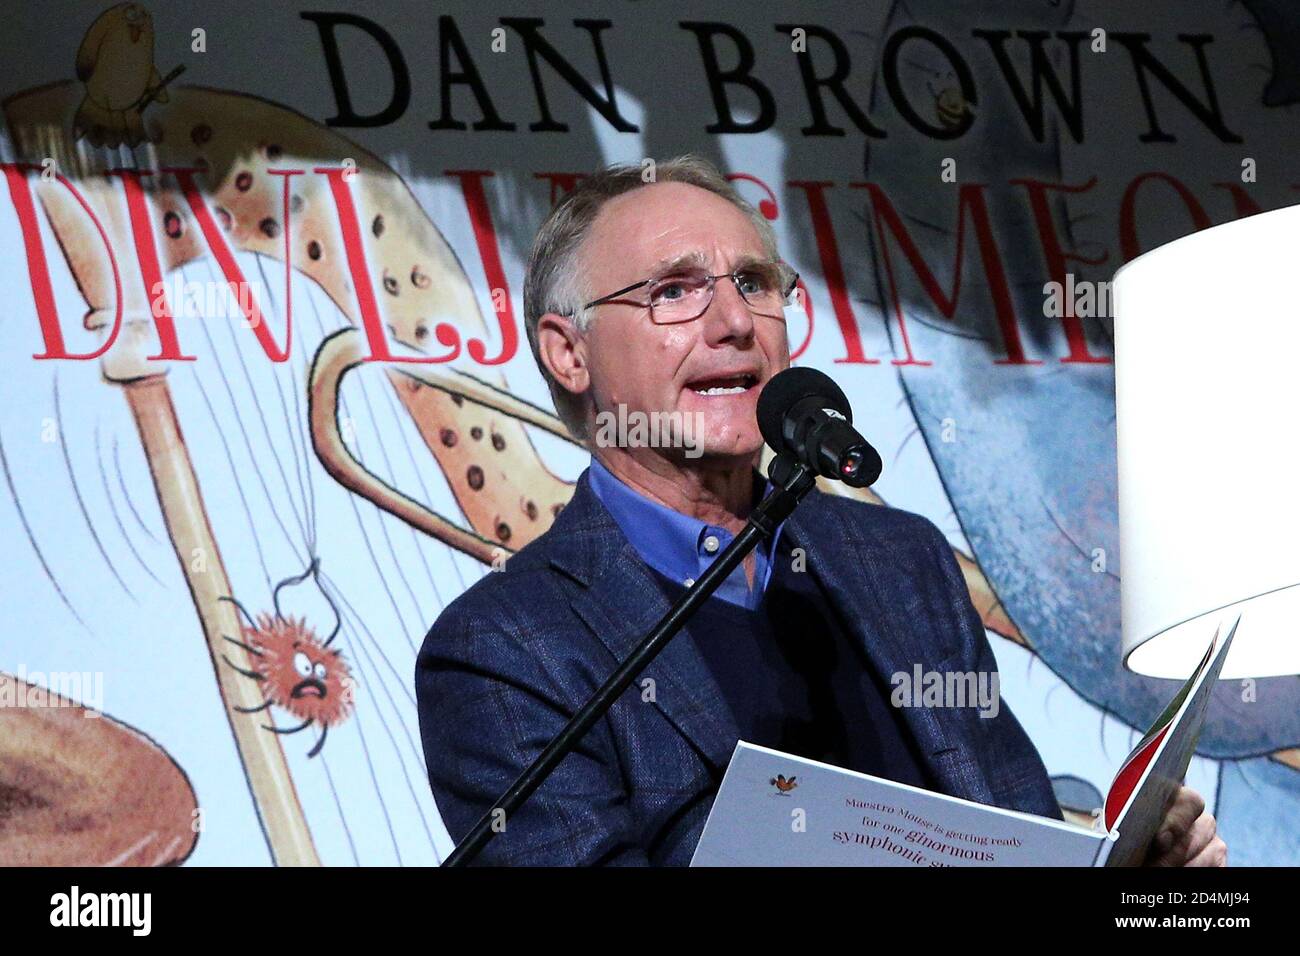 Zagreb, Croatia. 9th Oct, 2020. October 09, 2020, Zagreb, Croatia - World premiere of writer Dan Brown's musical picture book Wild Symphony. The concert was held with the participation of the Zagreb Philharmonic Orchestra. Credit: Anto Magzan/ZUMA Wire/Alamy Live News Stock Photo